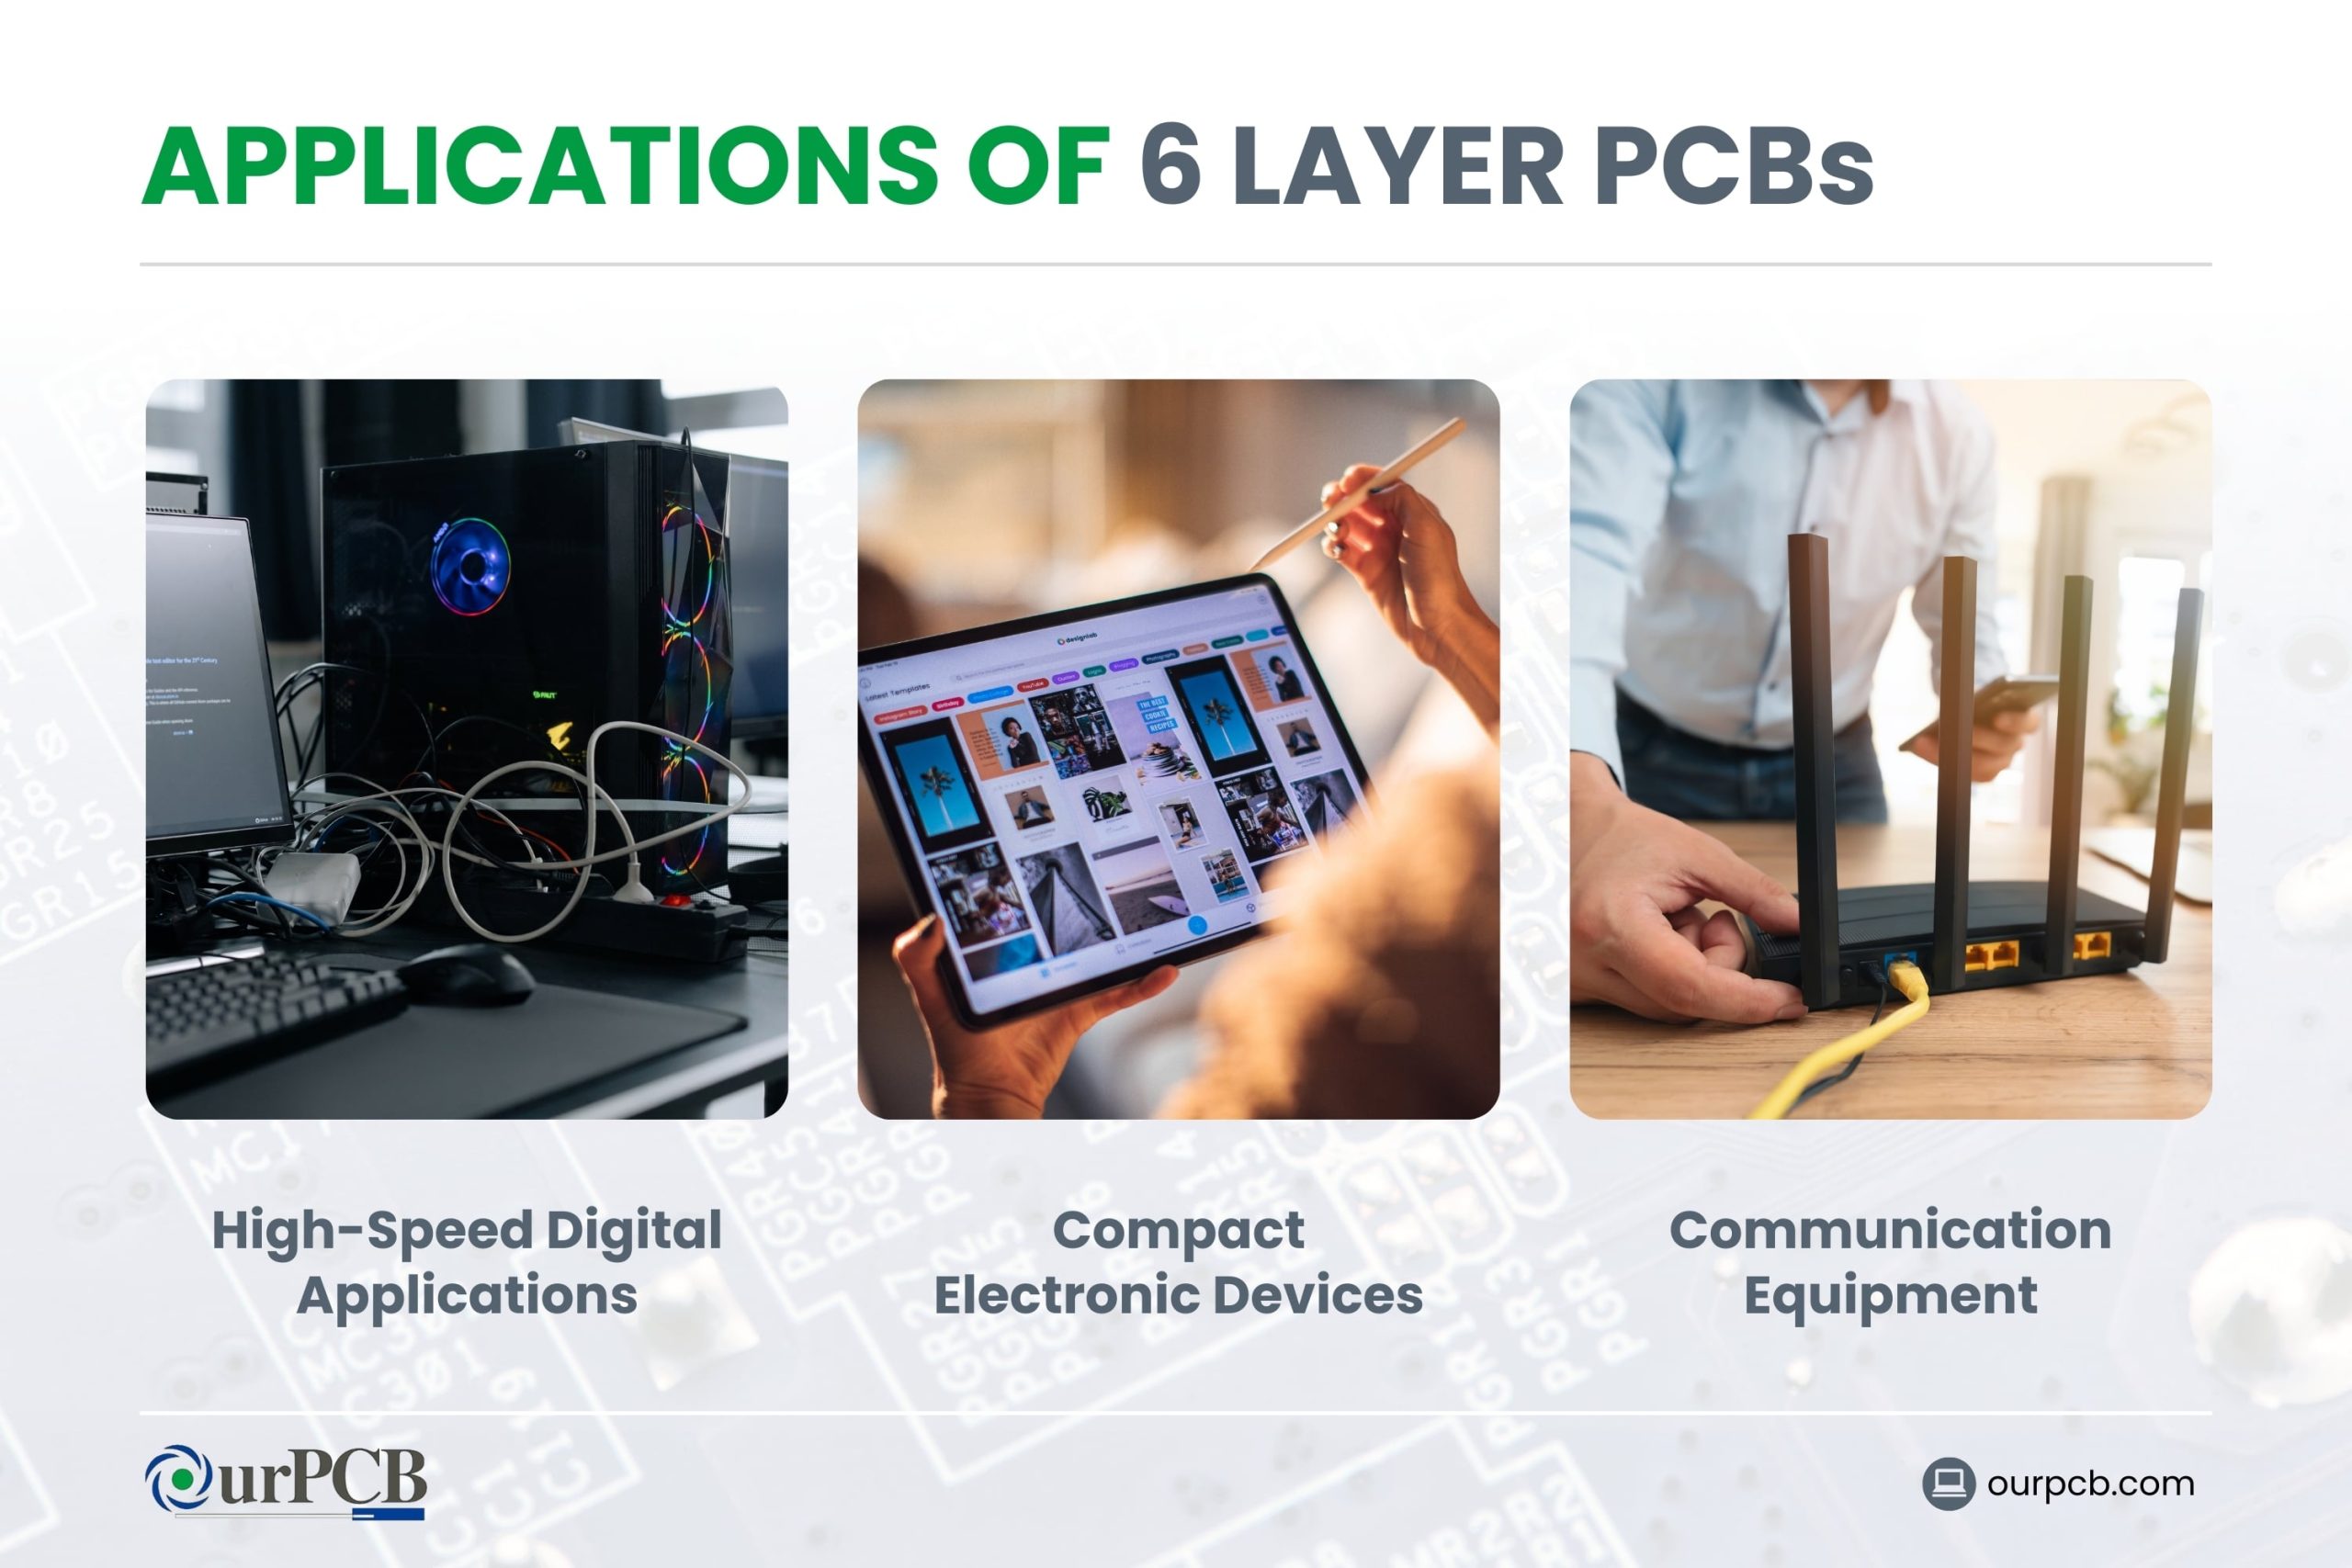 Applications of 6-Layer PCBs